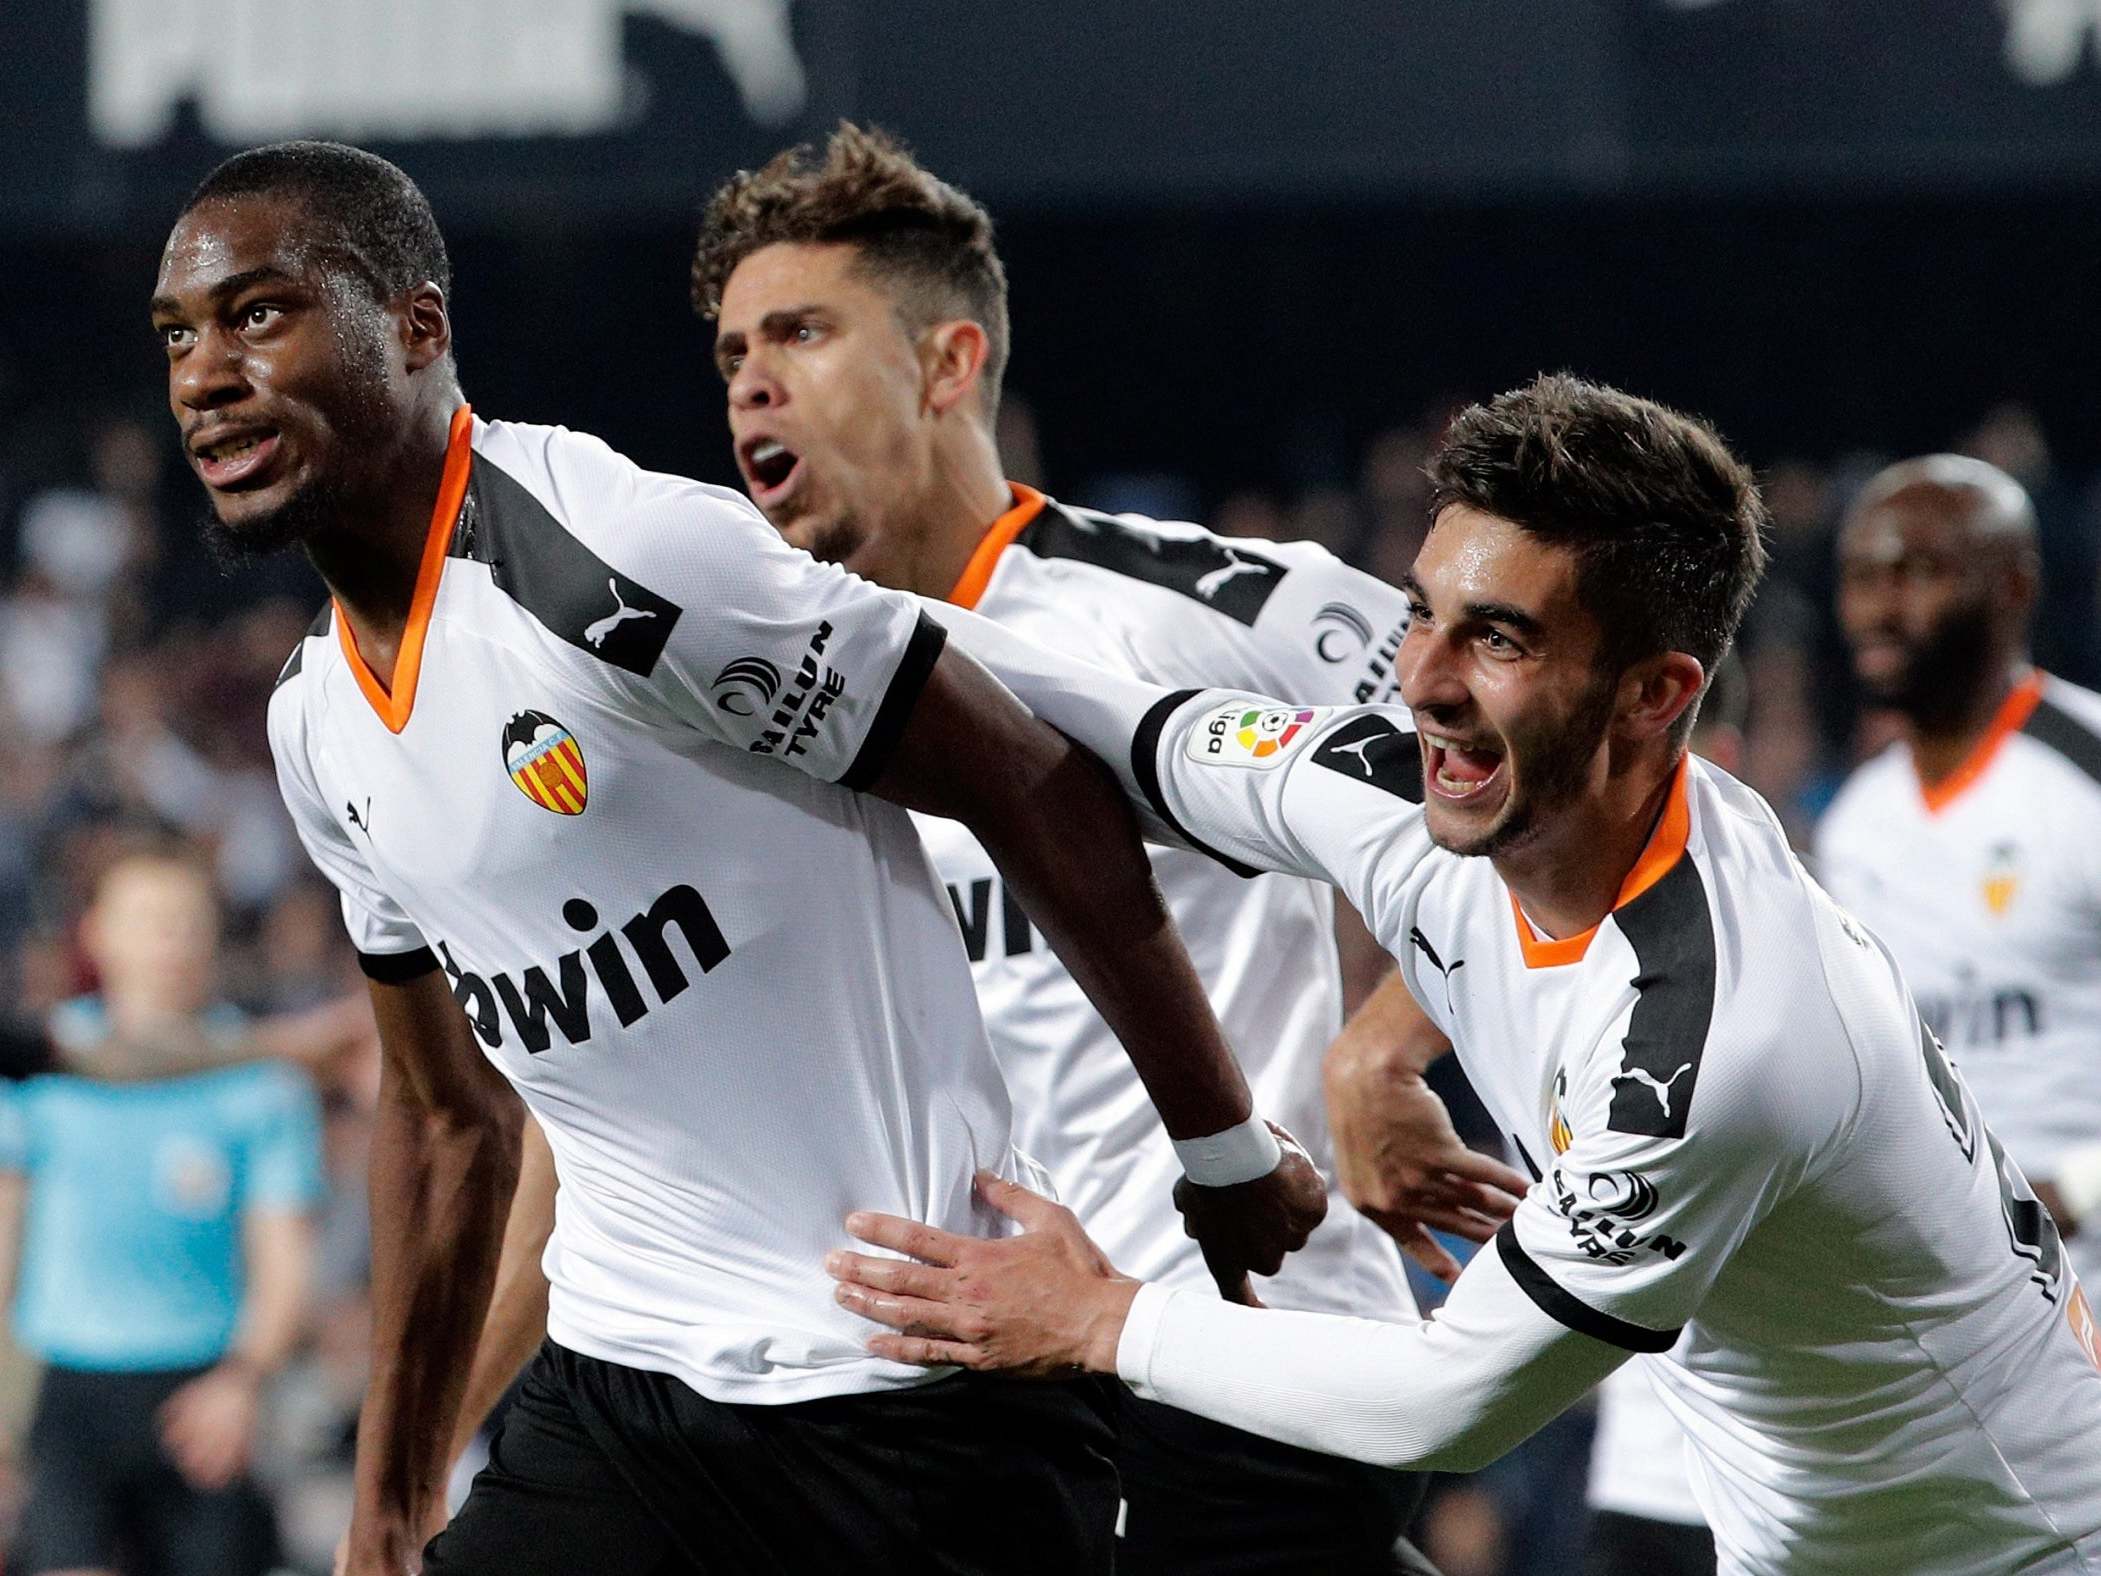 Valencia hit back to earn a share of the points